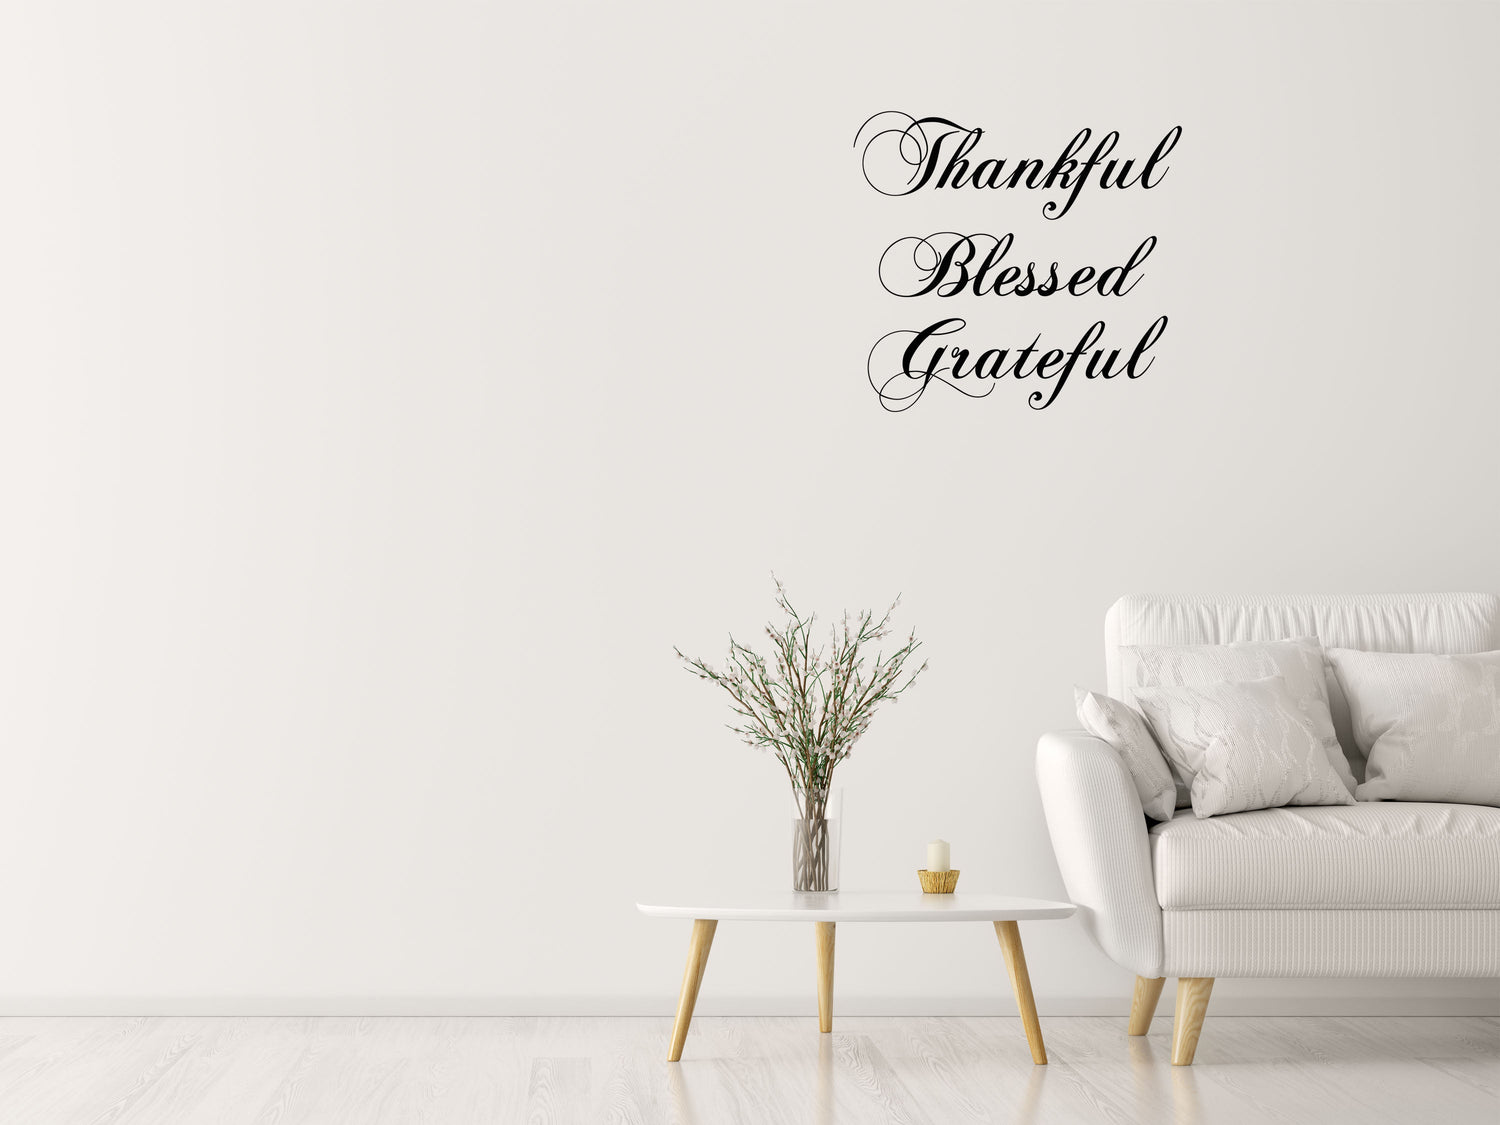 Thankful Blessed Grateful Wall Decal Quote - Spiritual Decal - Christian Decal Quote - Blessing Sticker Wall Decor - Thanksgiving Vinyl Wall Decal Inspirational Wall Signs 